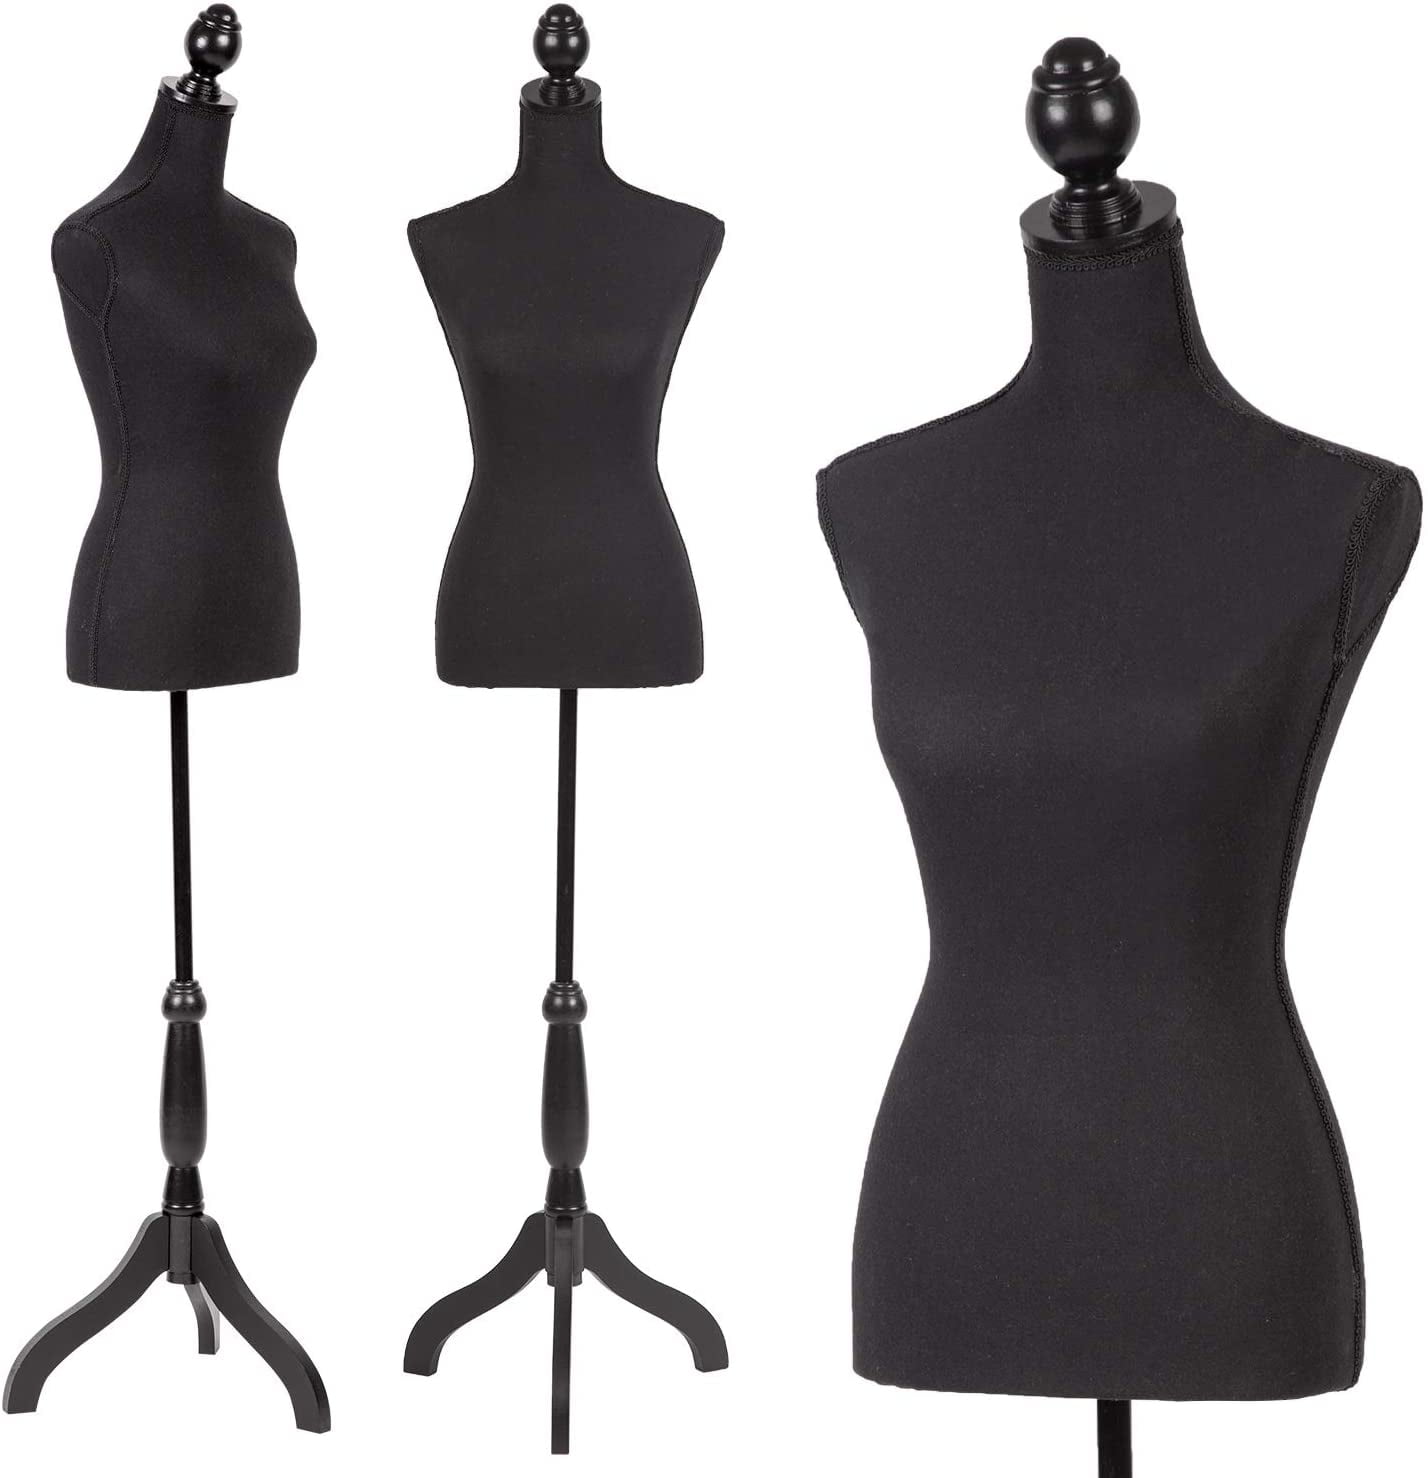 4 TORSO MANNEQUINS MALE FEMALE CHILD TODDLER BODY DRESS FORMS 4 HOOKS 1 STAND 